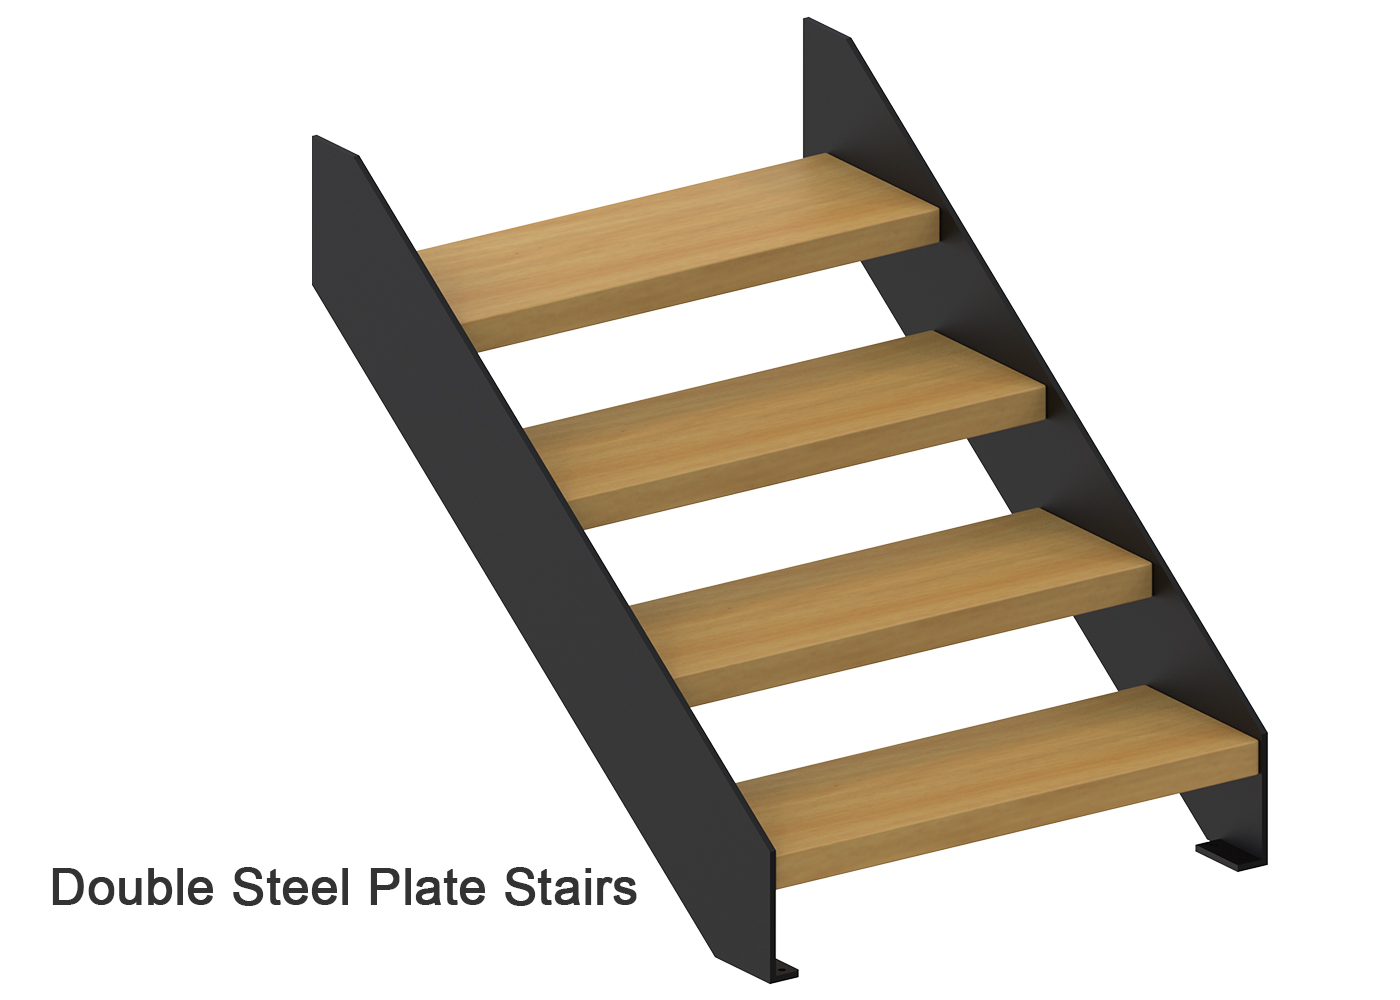 Dobleng Steel Plate Stairs